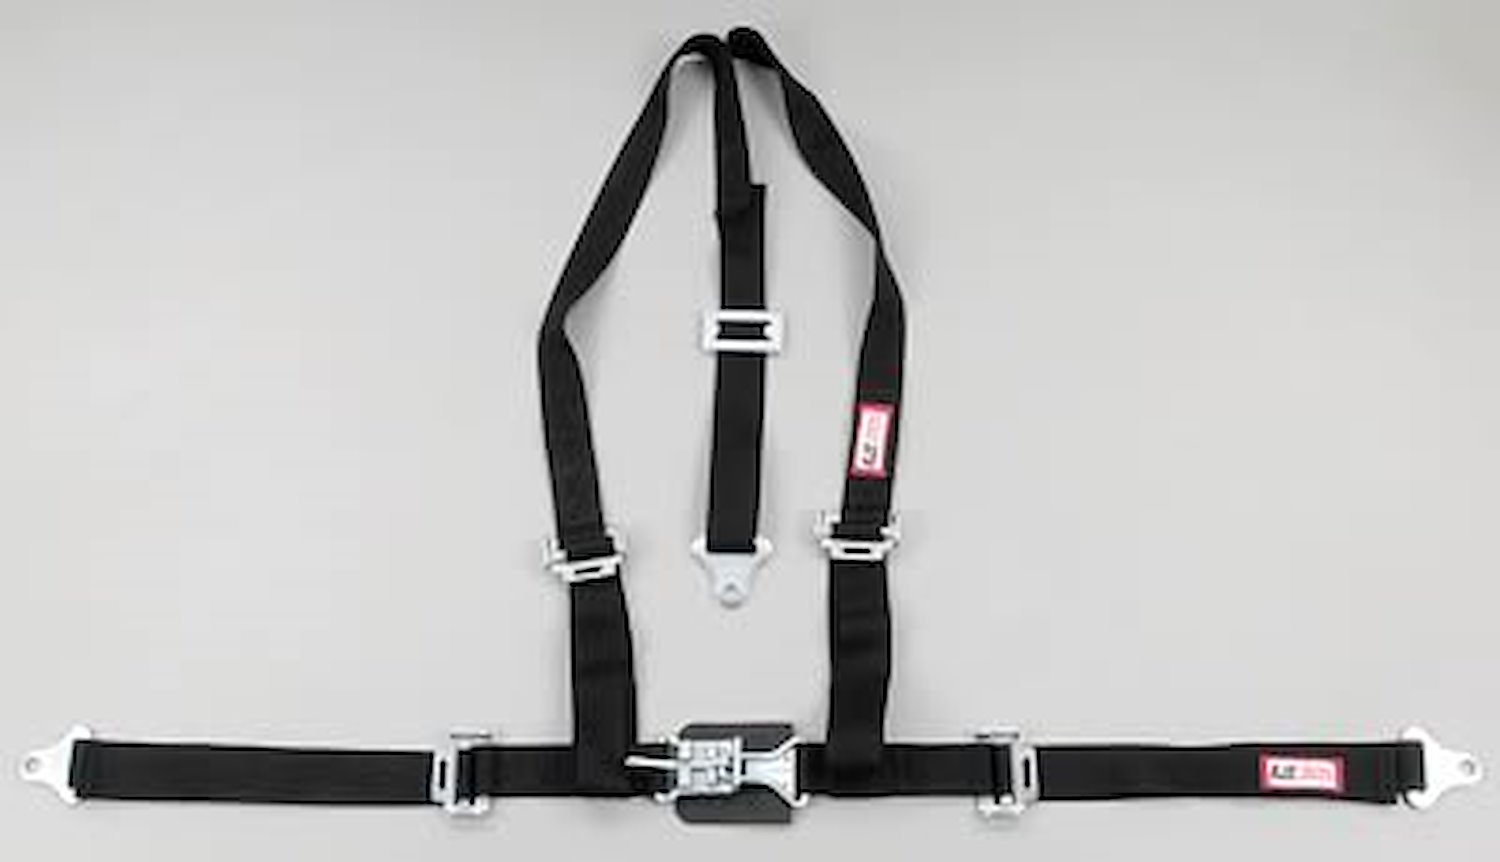 NON-SFI L&L HARNESS 2 PULL UP Lap Belt SNAP SEWN IN 2 S.H. Y FLOOR Mount WRAP/SNAP BLUE